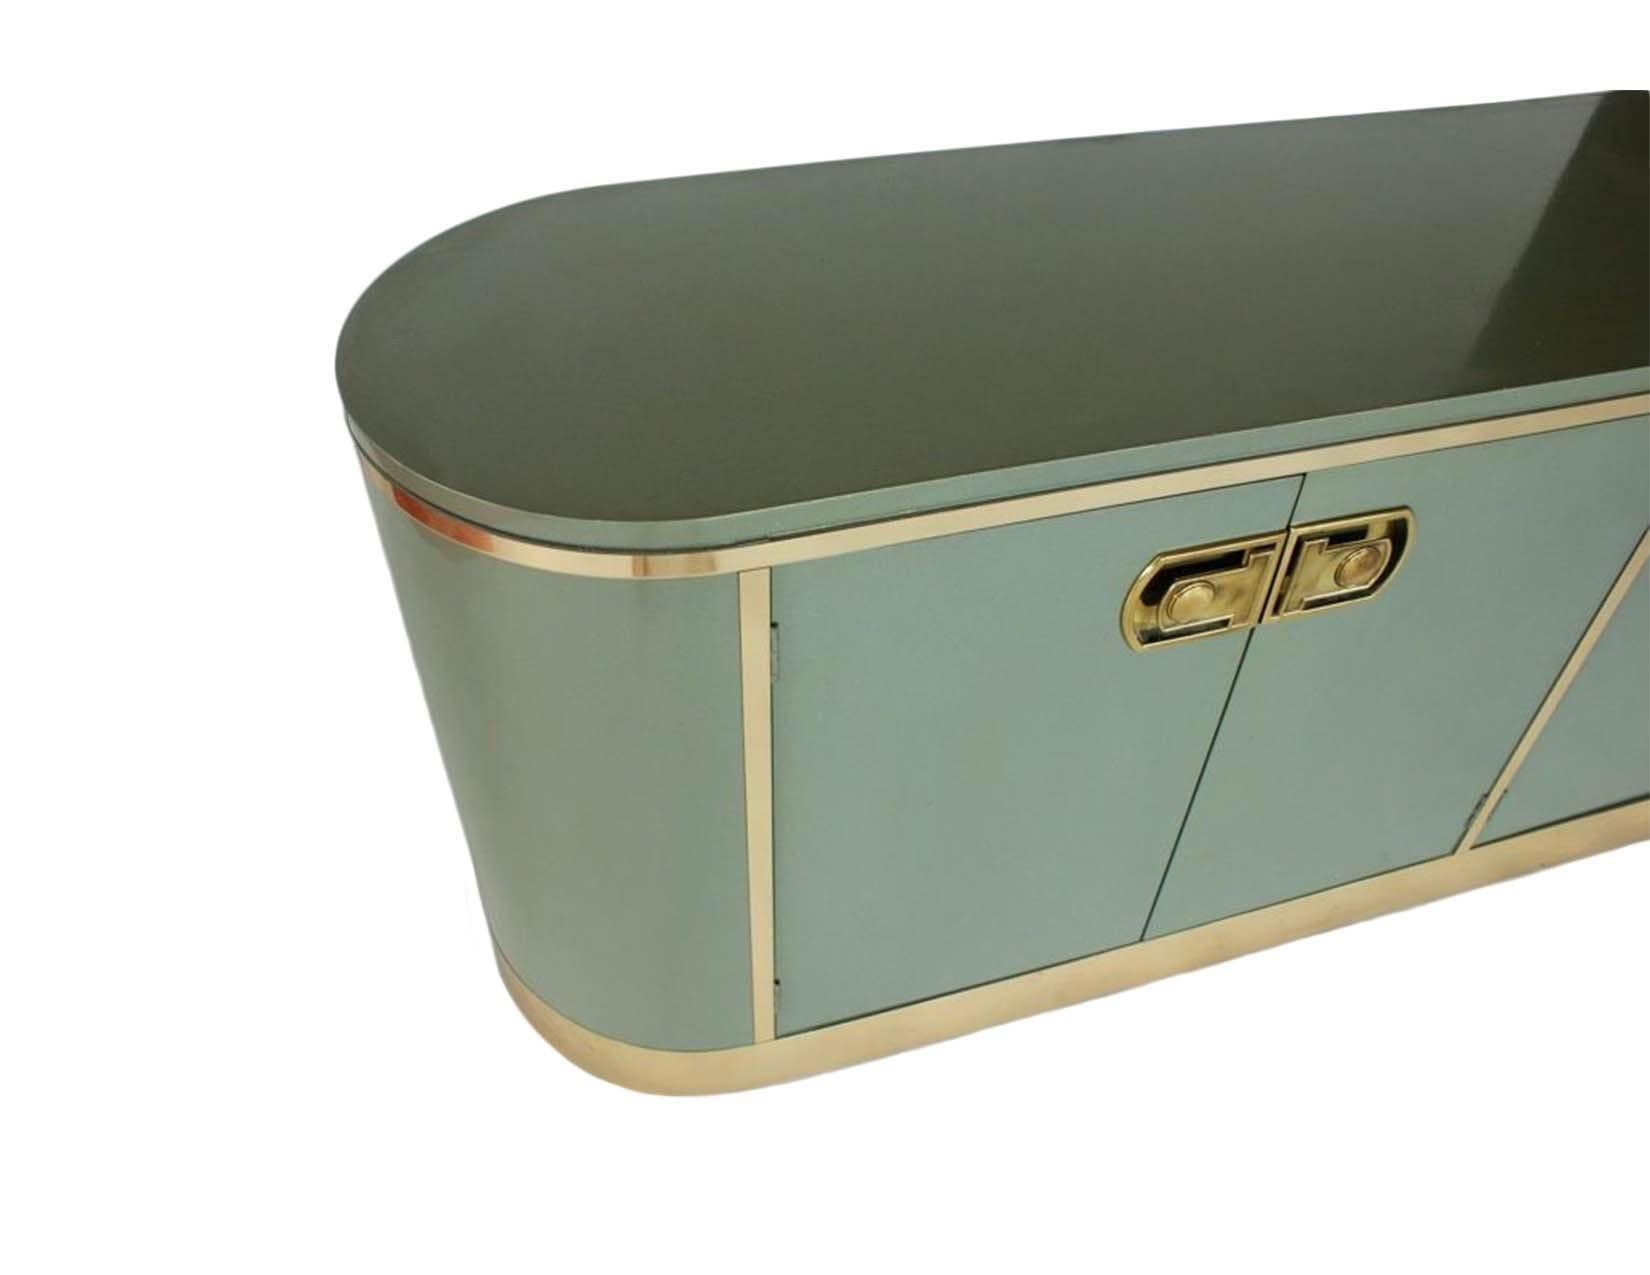 Lacquered Stunning Metallic Lacquer and Polished Brass Sideboard/Credenza by Mastercraft